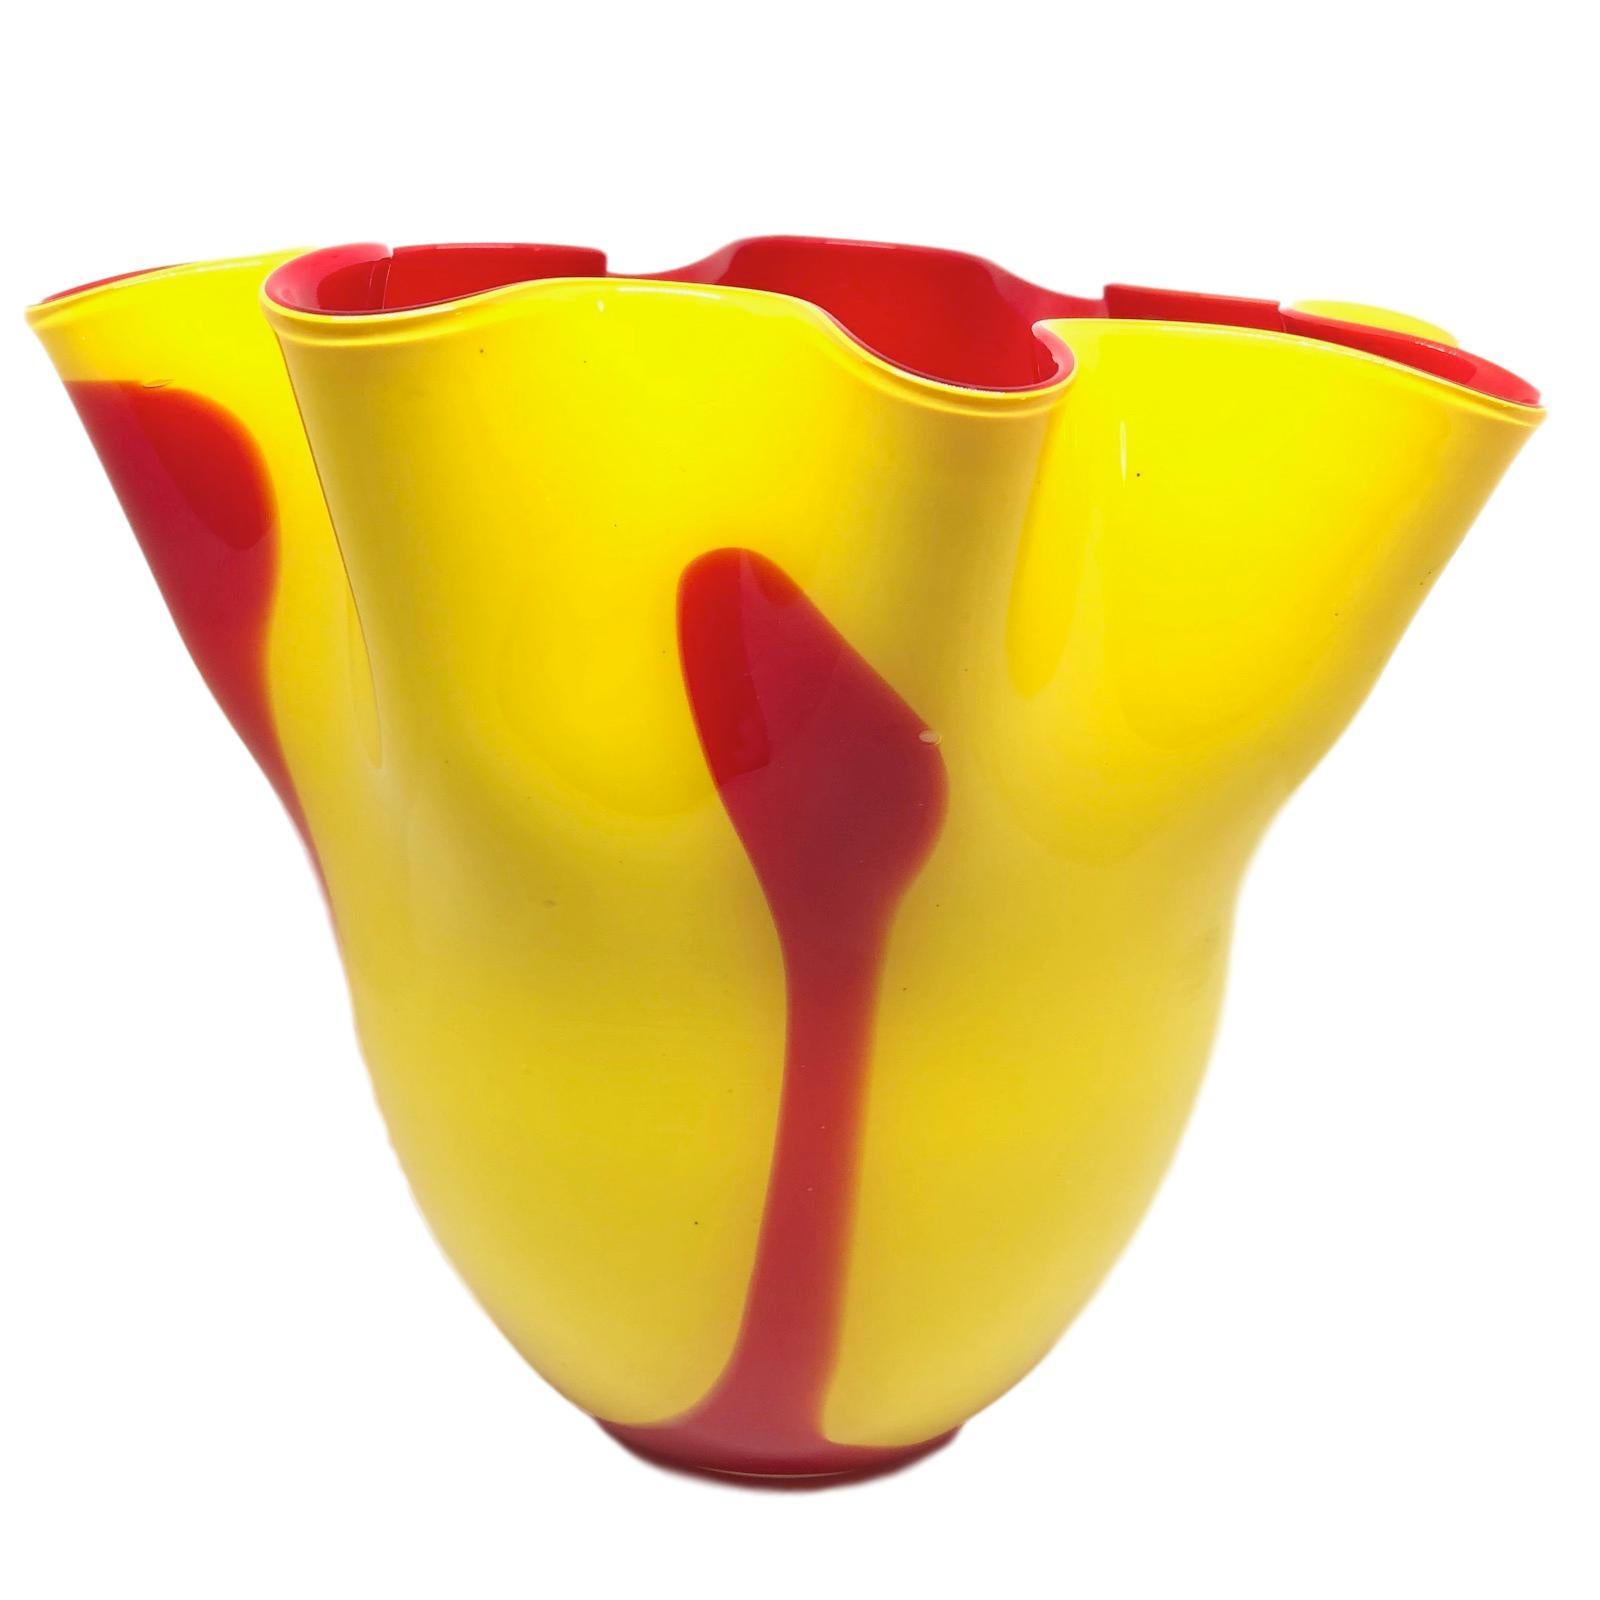 Beautiful Murano hand blown red and yellow Italian art glass handkerchief / fazzoletto vase. Created by the Fratelli Toso company. Measures: 9